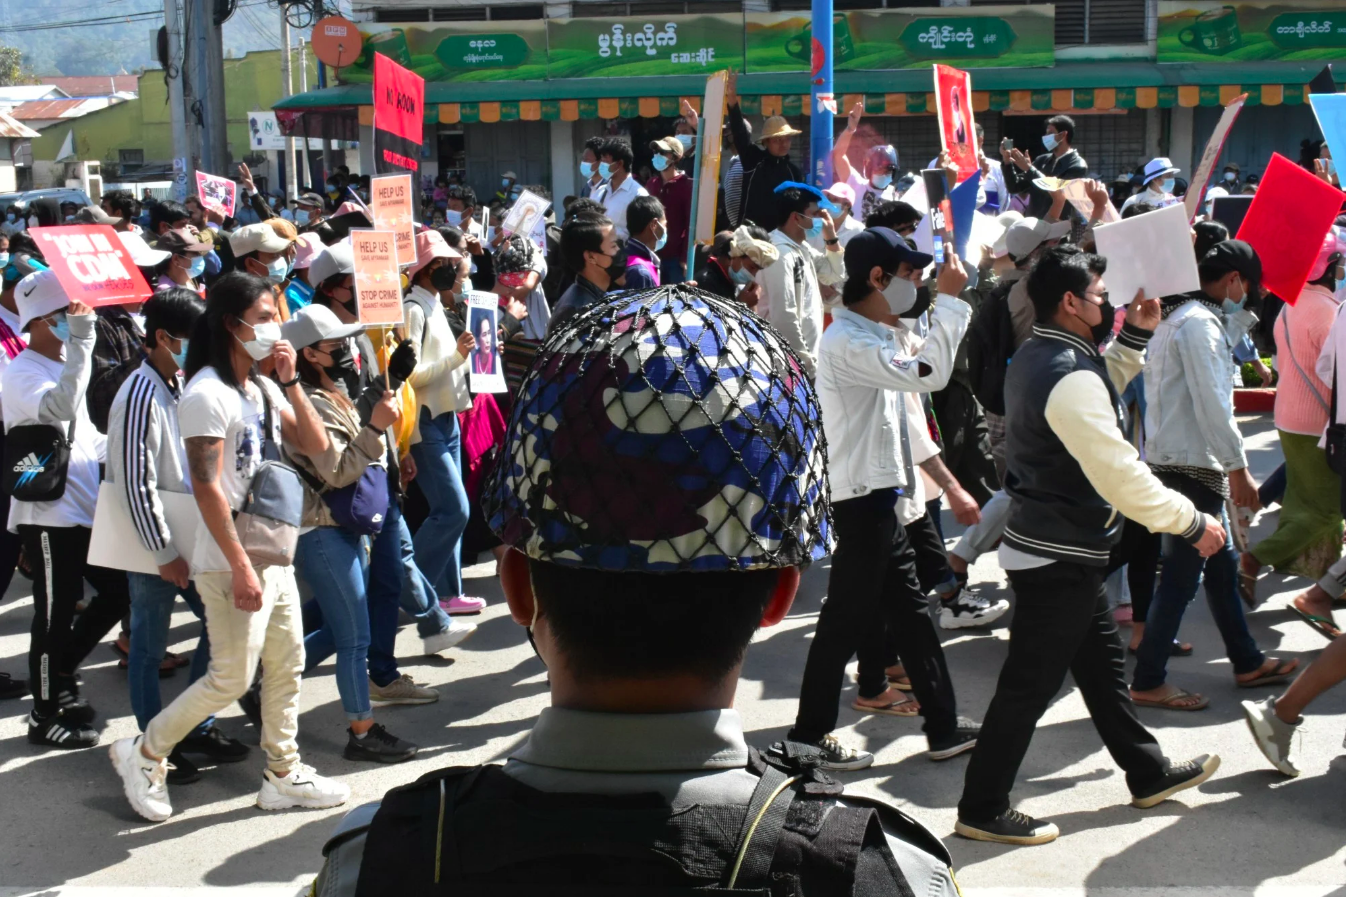 People march during a protest in Taunggyi, the capital of Shan State. Image: Robert Bociaga.